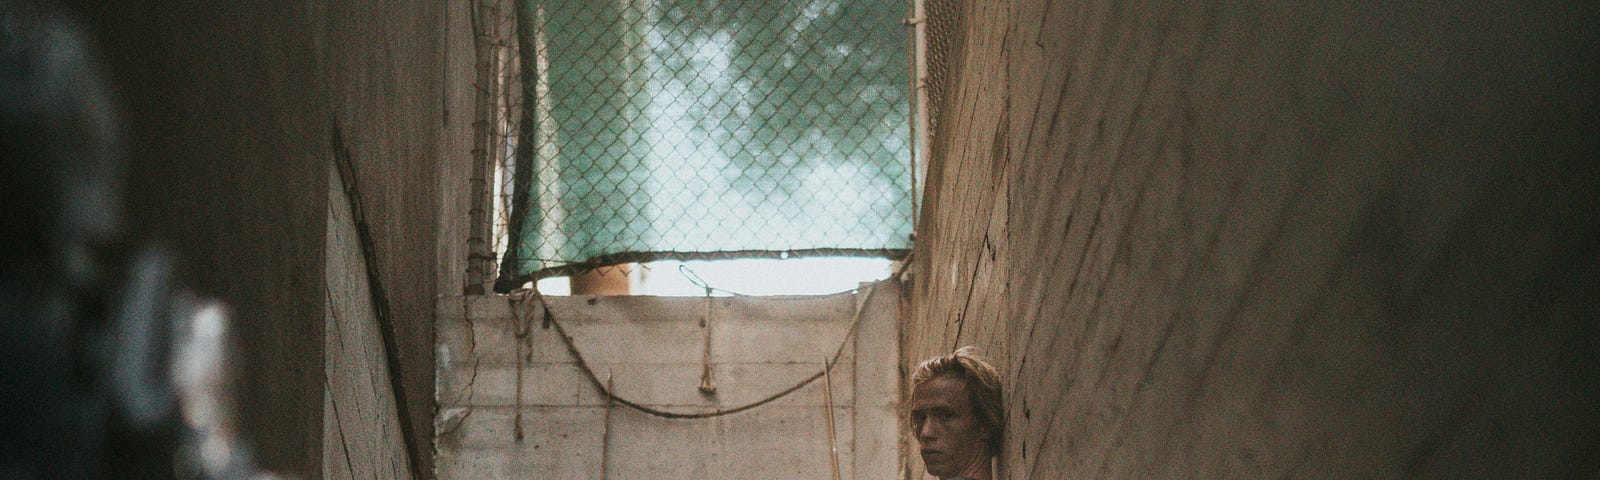 A man seemingly tired or disappointed, sitting in an alley